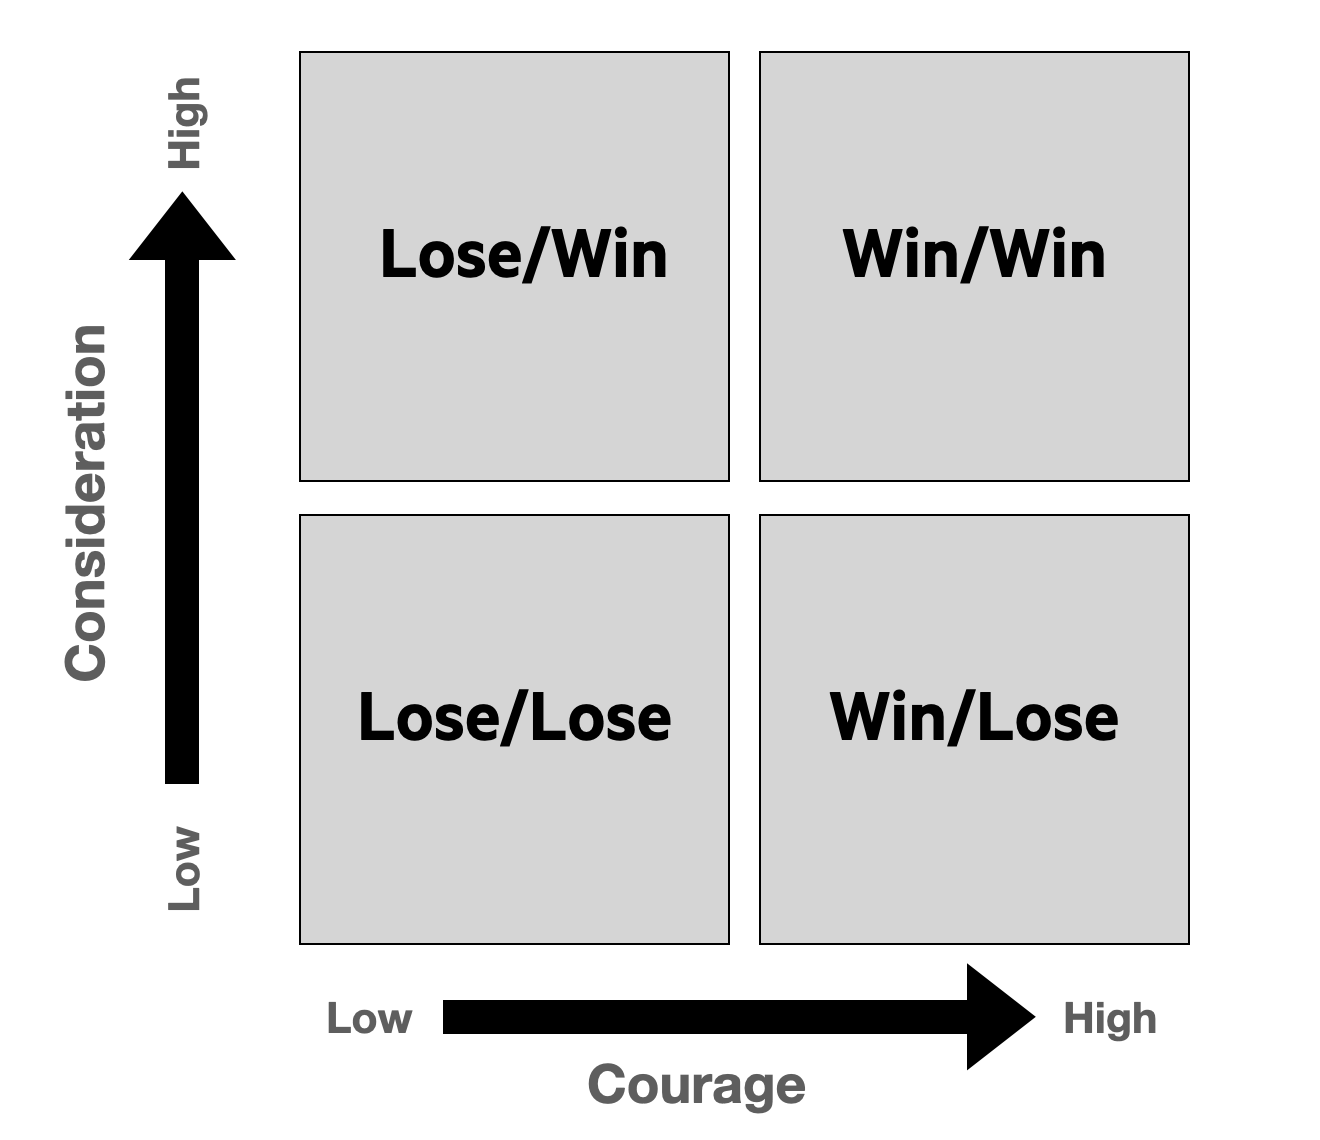 Diagram showing low-high consideration and low-high courage; high of both leads to win/win